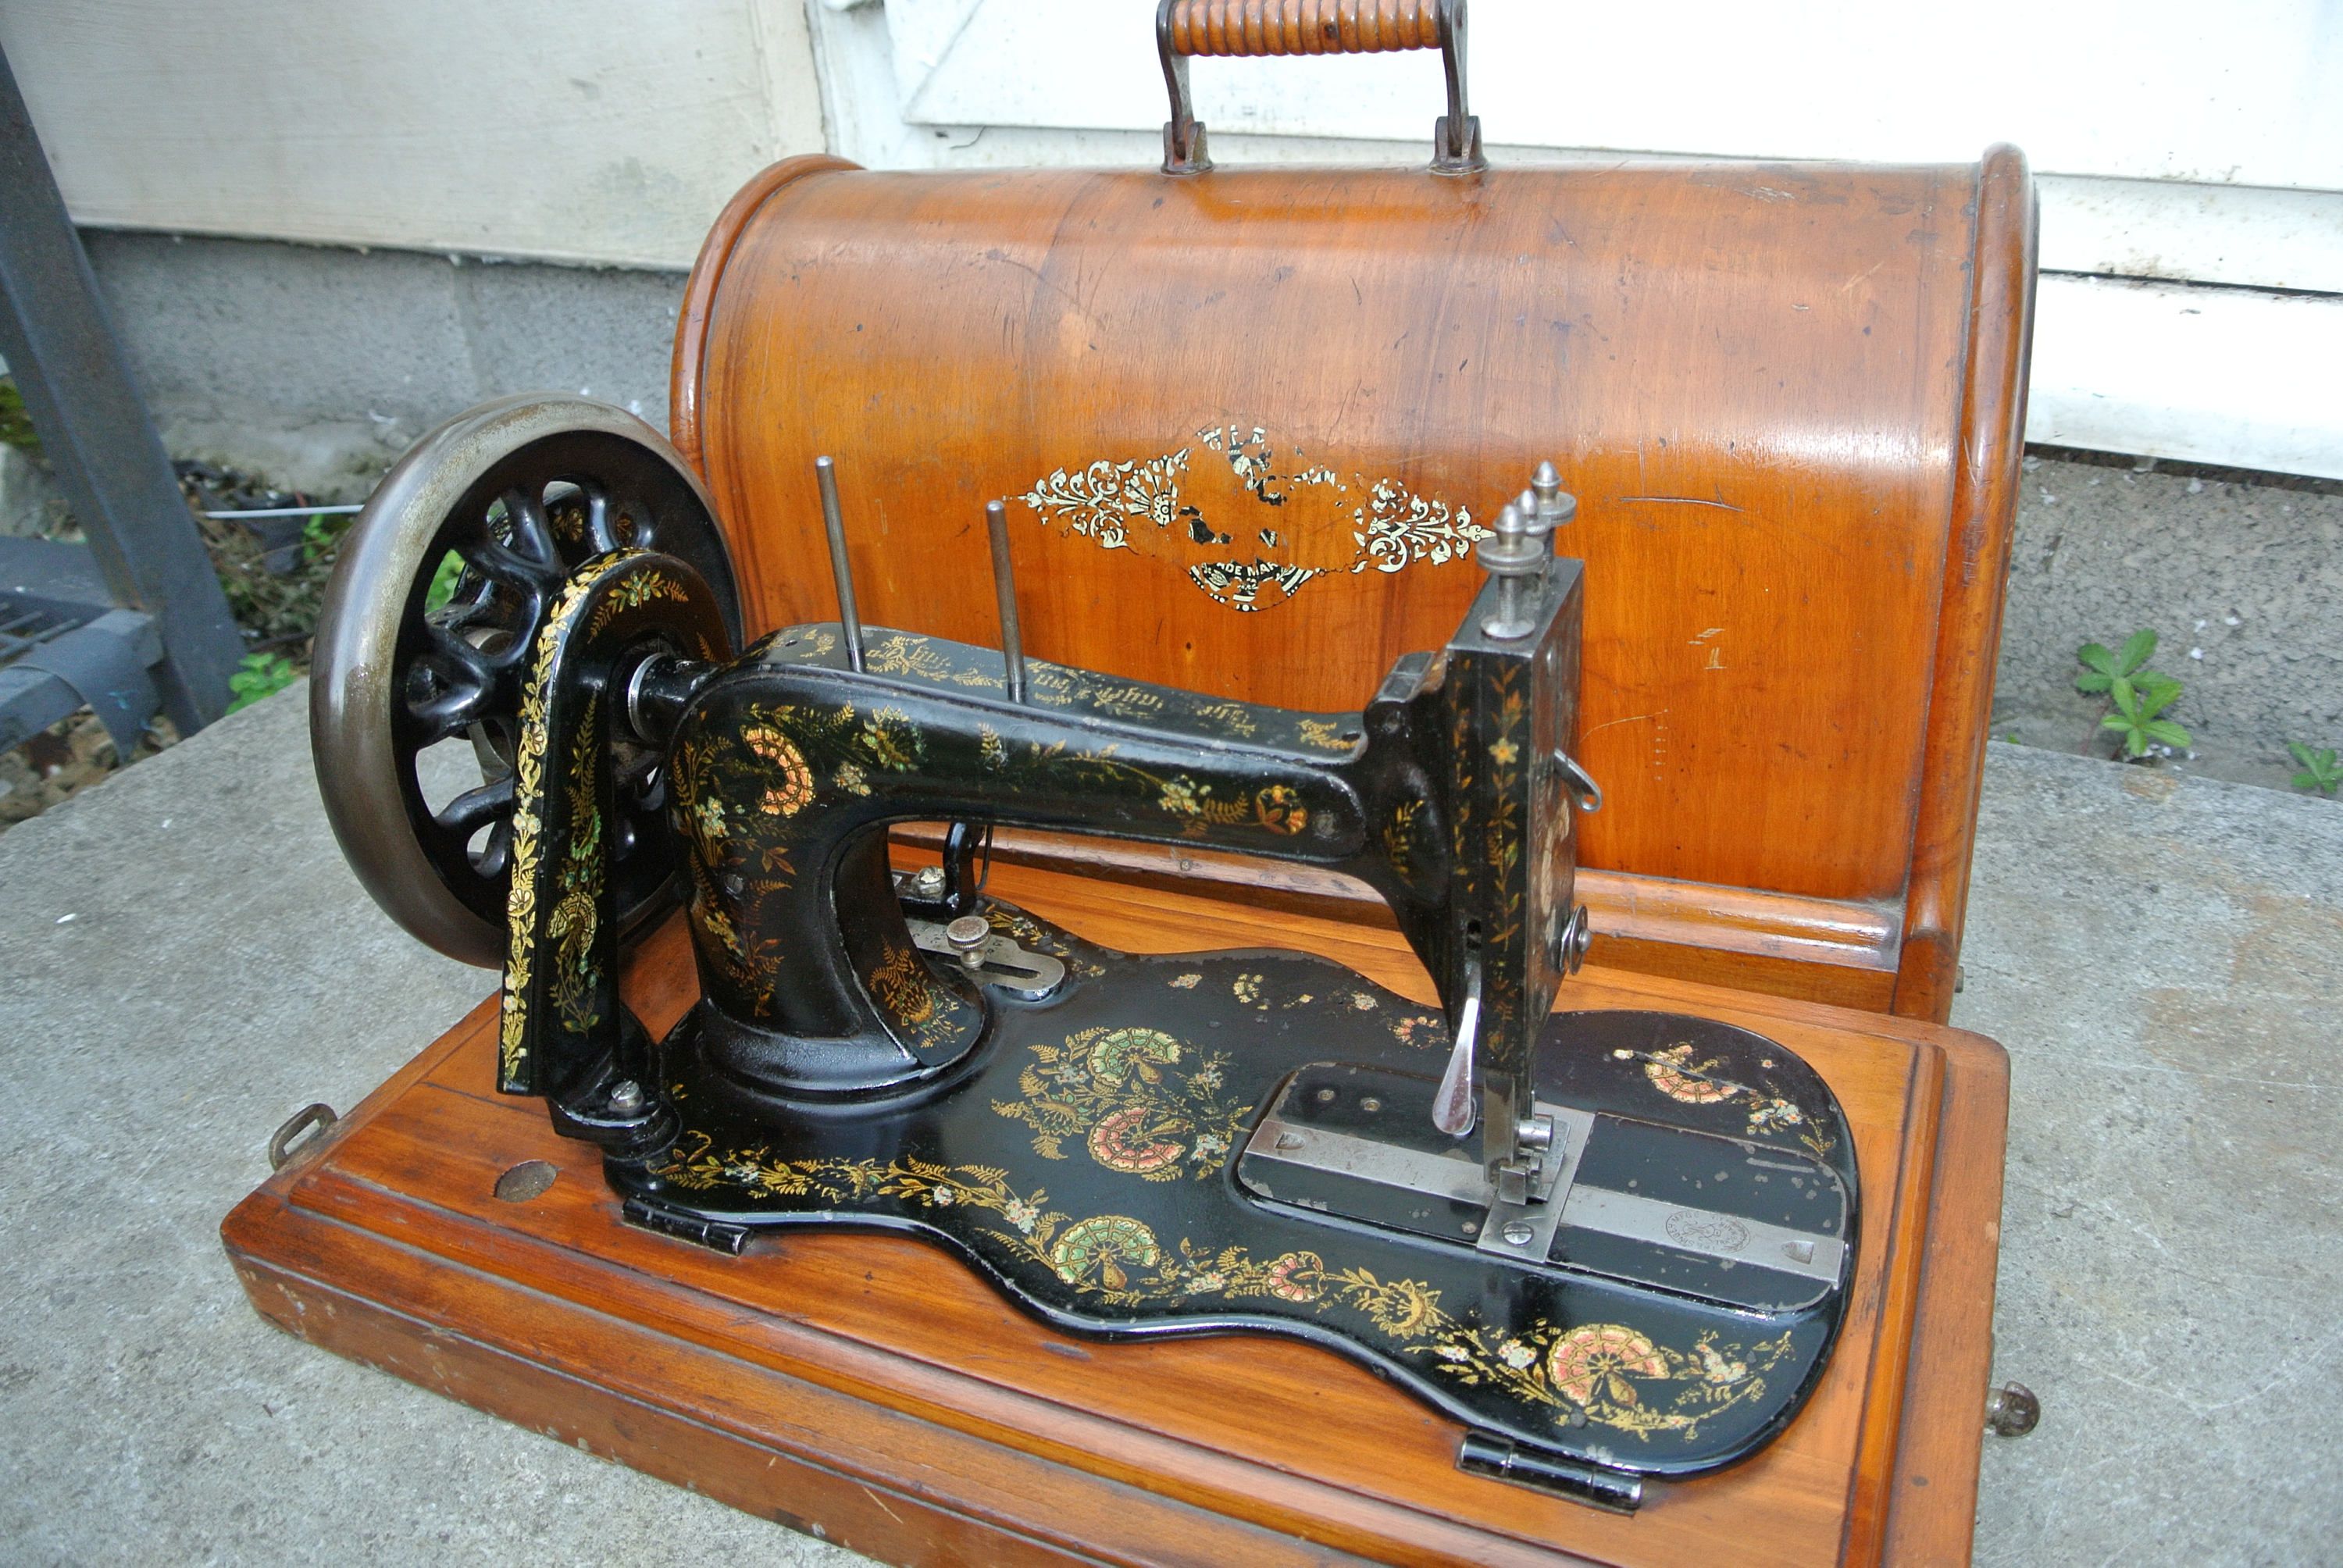 Pin by Zion Vintage Crafts on sewing machines | Pinterest | Antique ...